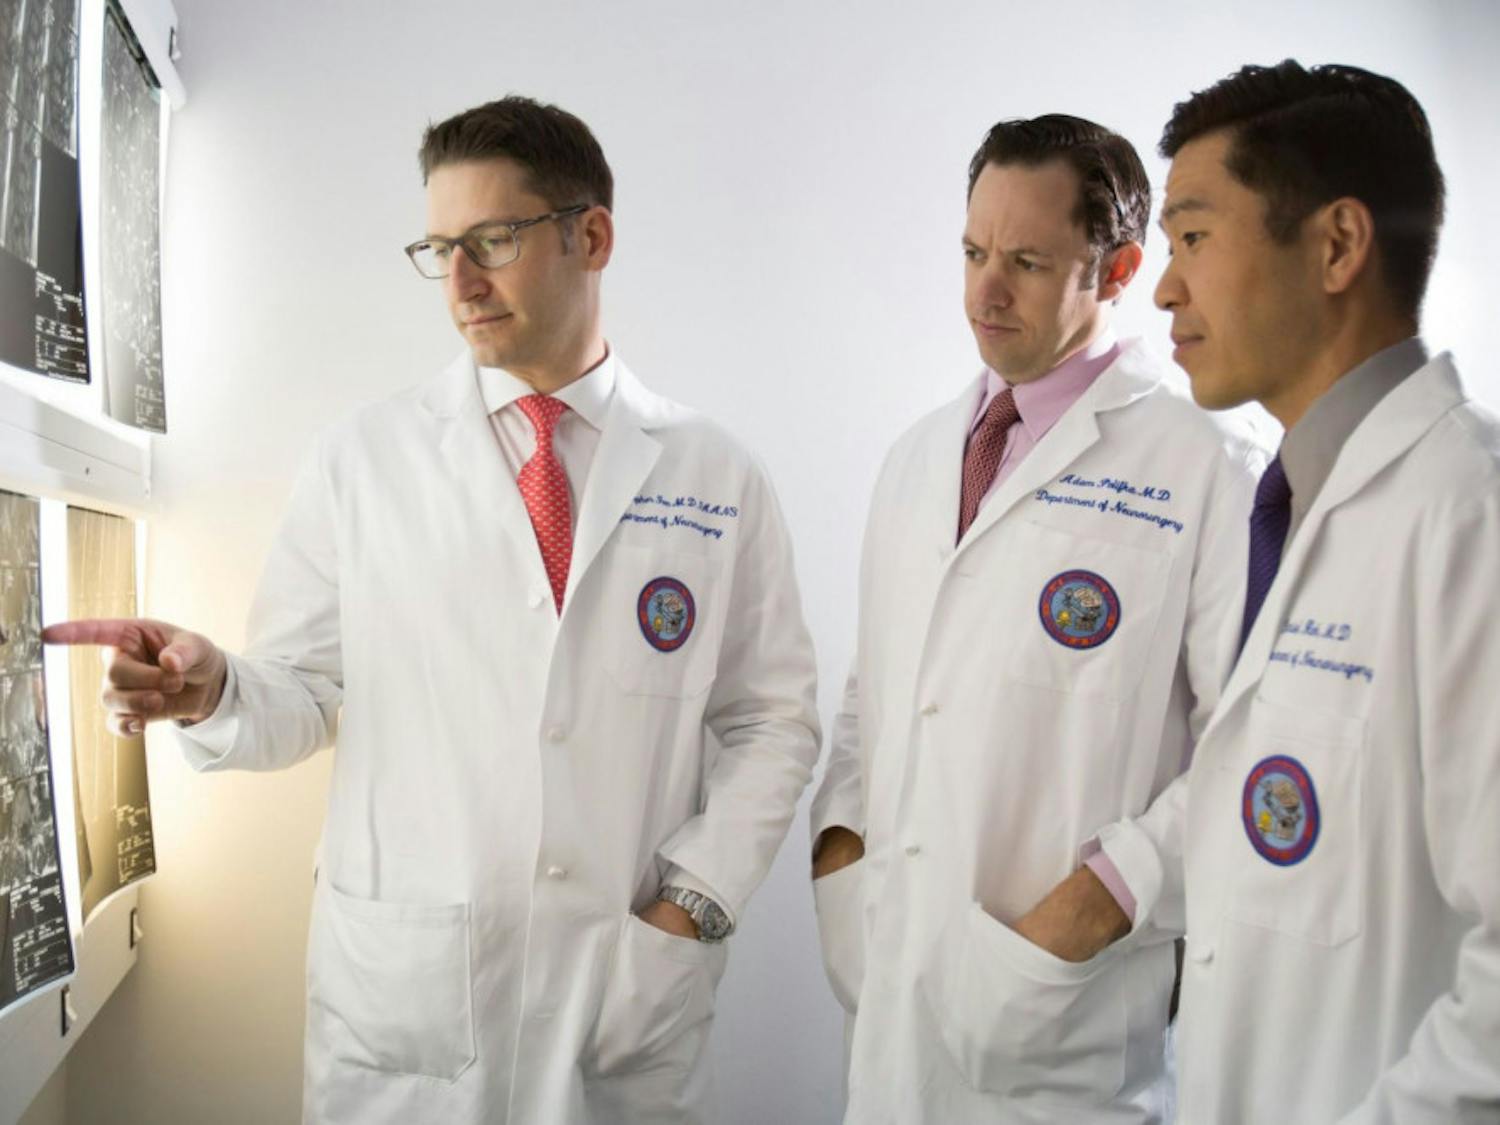 (From left) UF Health neurosurgeons Dr. William Fox, Dr. Adam Polifka and Dr. Daniel Hoh are part of a multidisciplinary team improving care for patients with back and neck pain at the UF Health Comprehensive Spine Center.